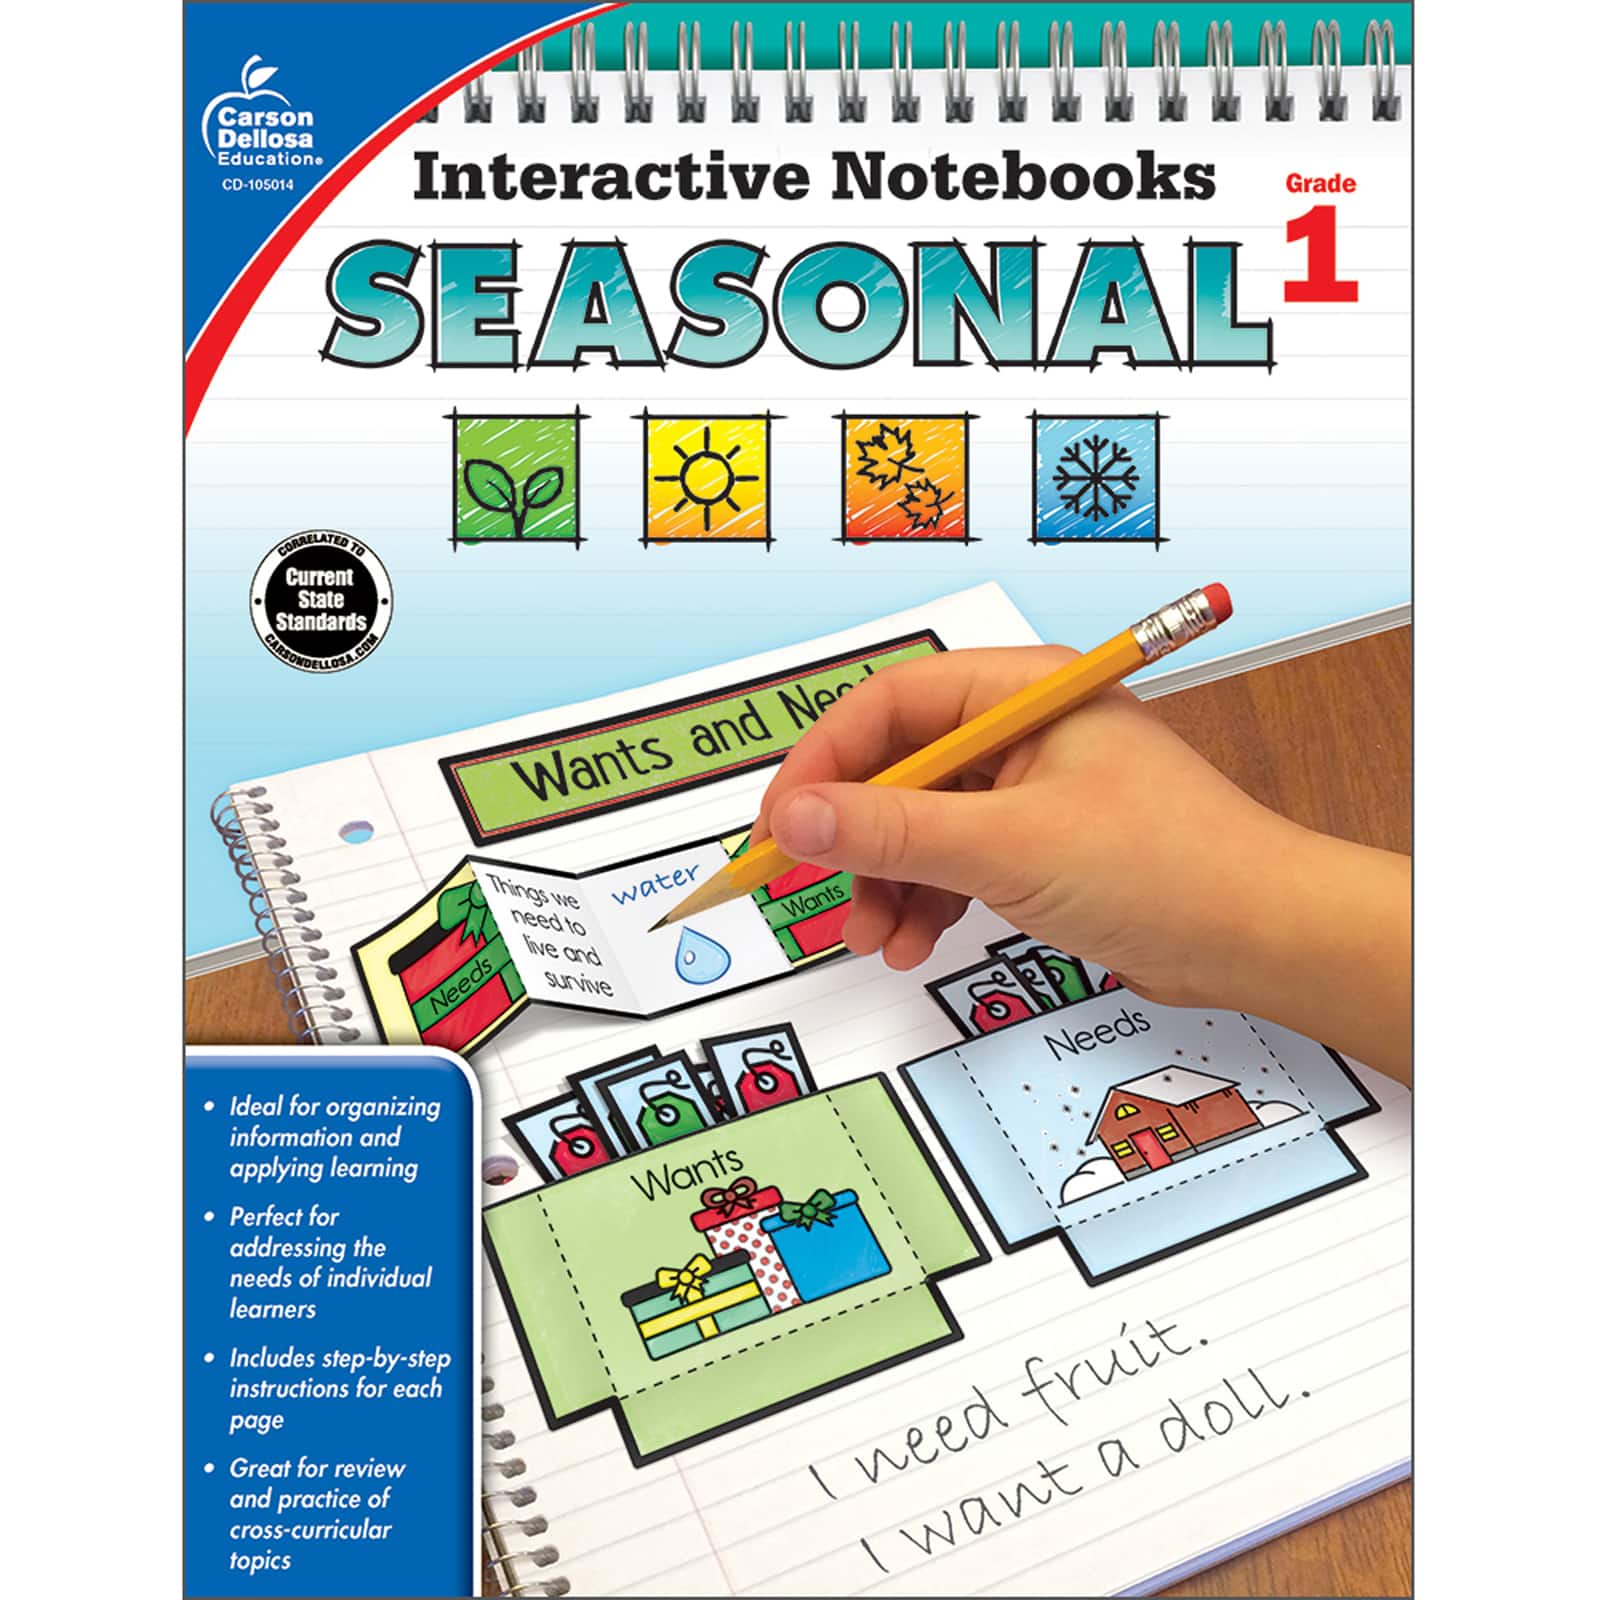 Purchase the Interactive Notebooks: Seasonal Resource Book, Grade 1 at Michaels